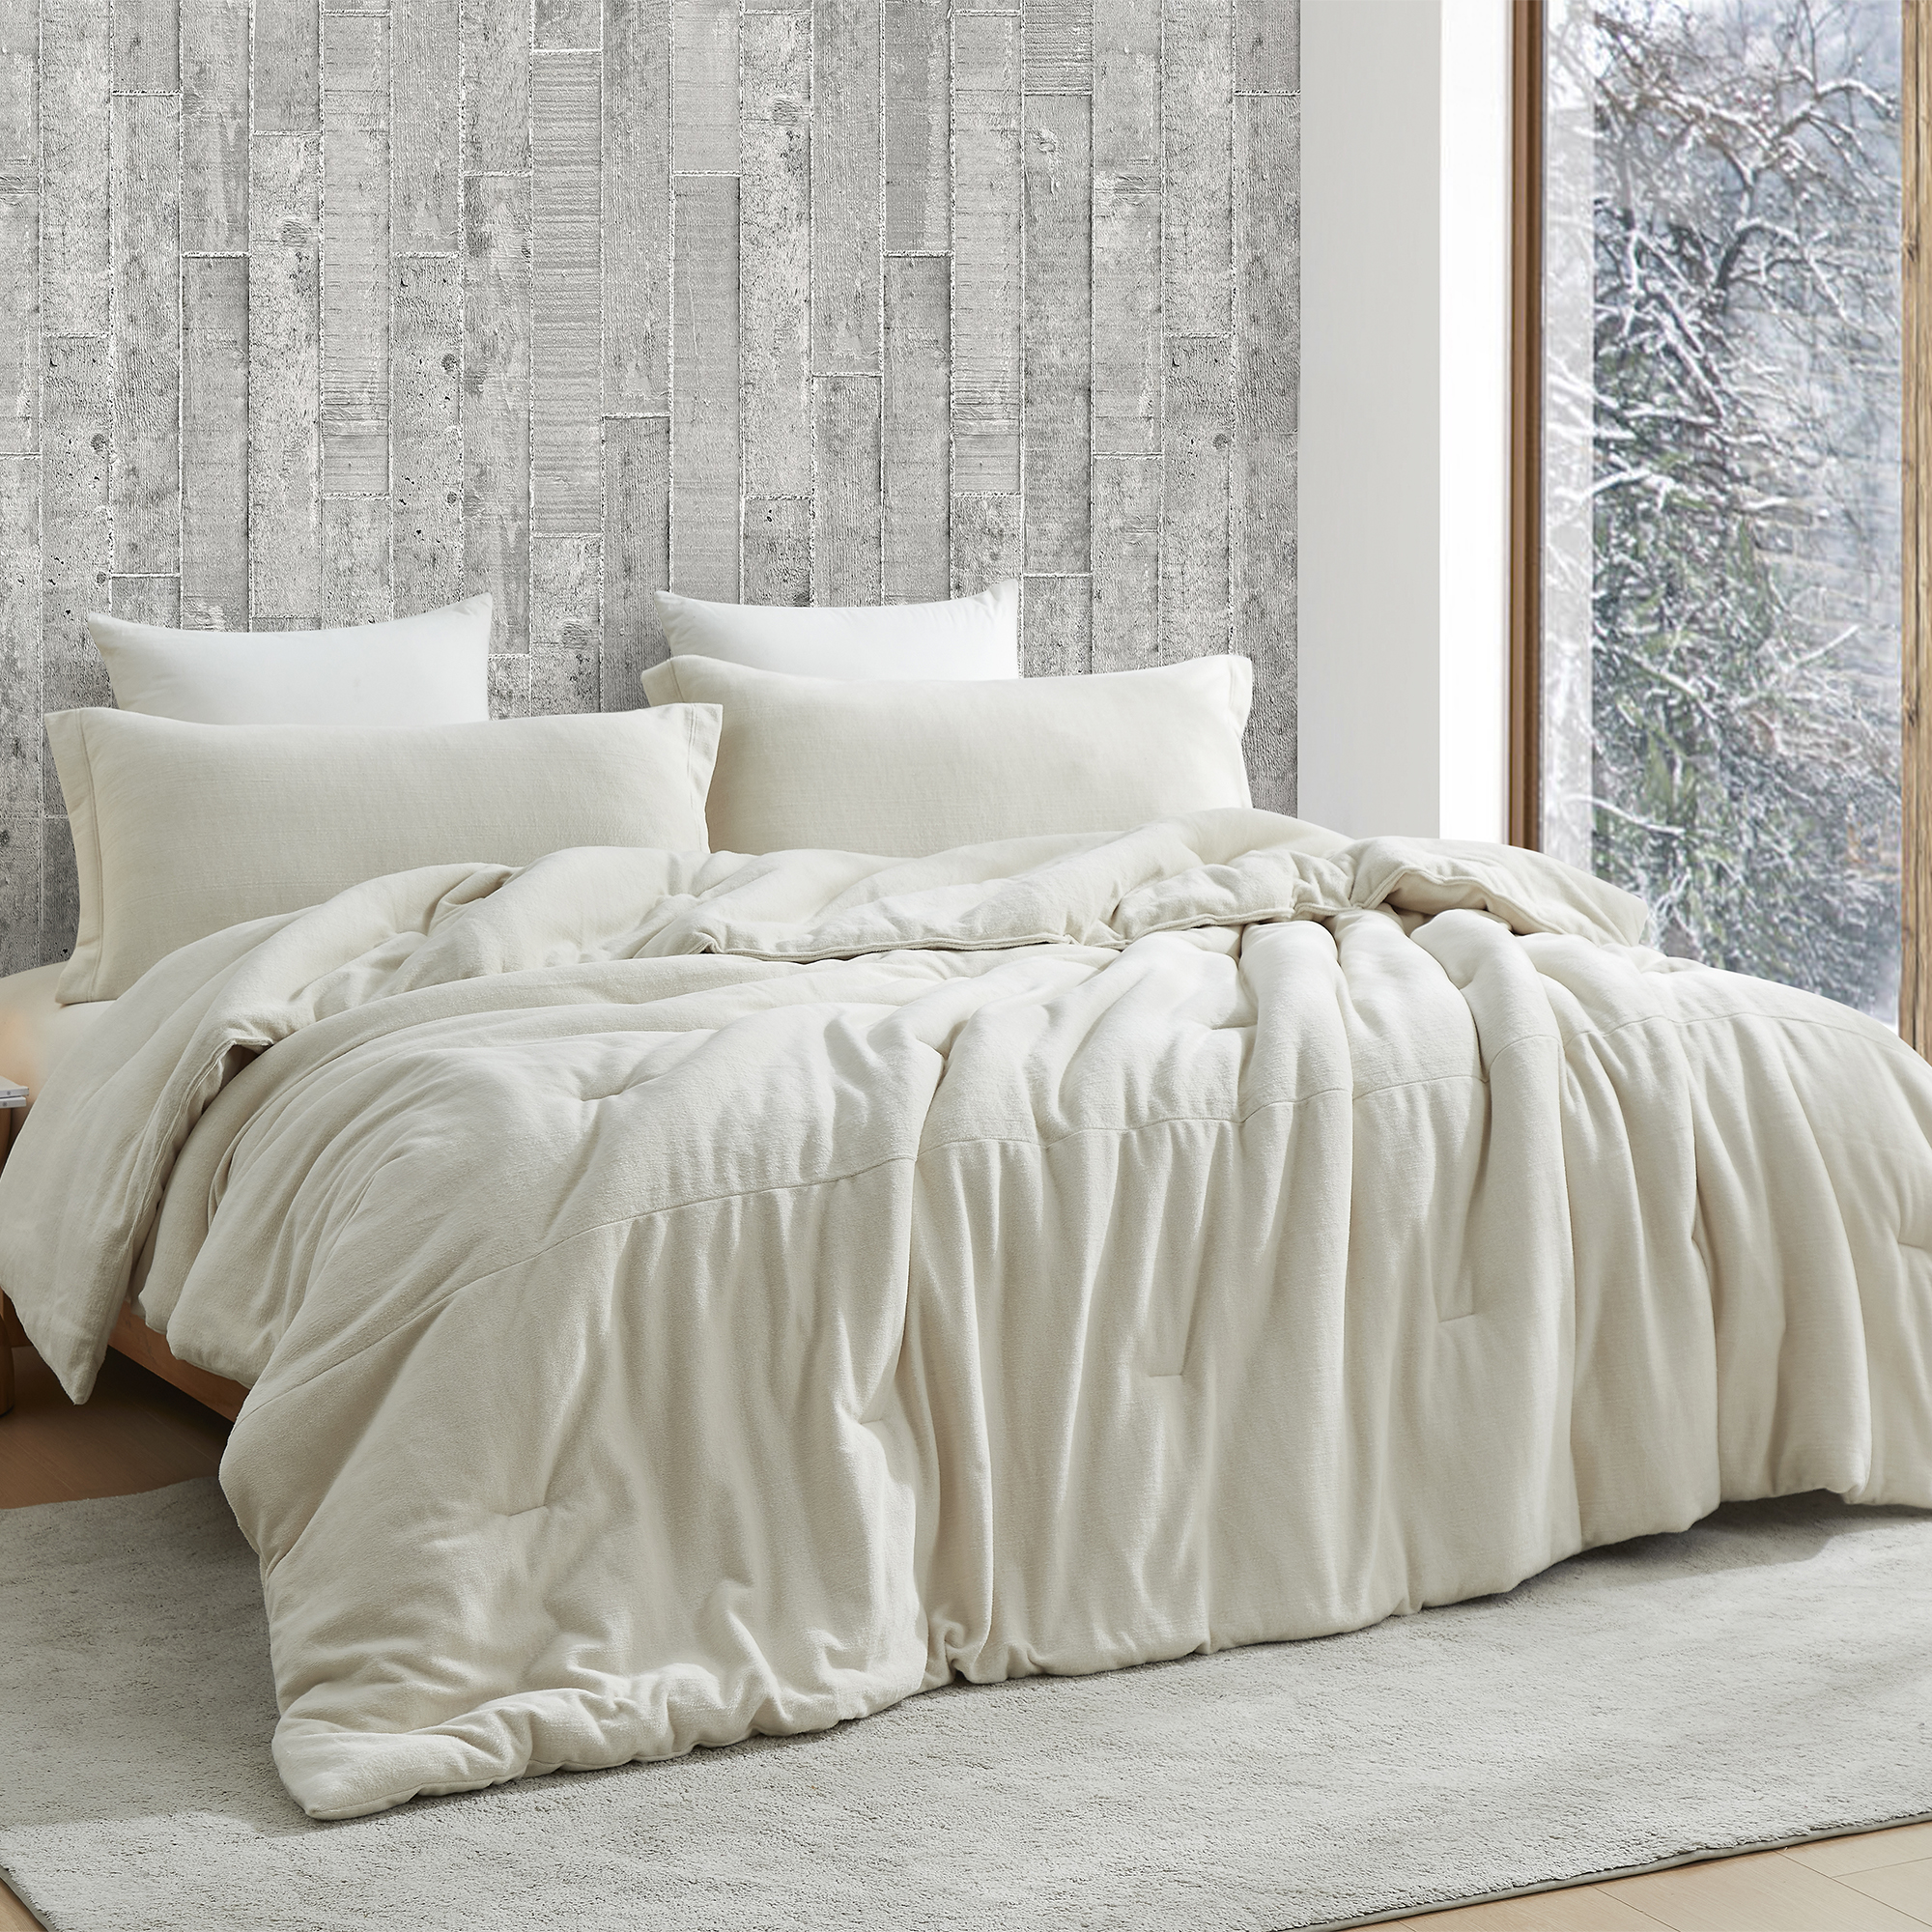 Inside Out Hoodie Sleep - Coma Inducer® Oversized Queen Comforter - Creamy Taupe